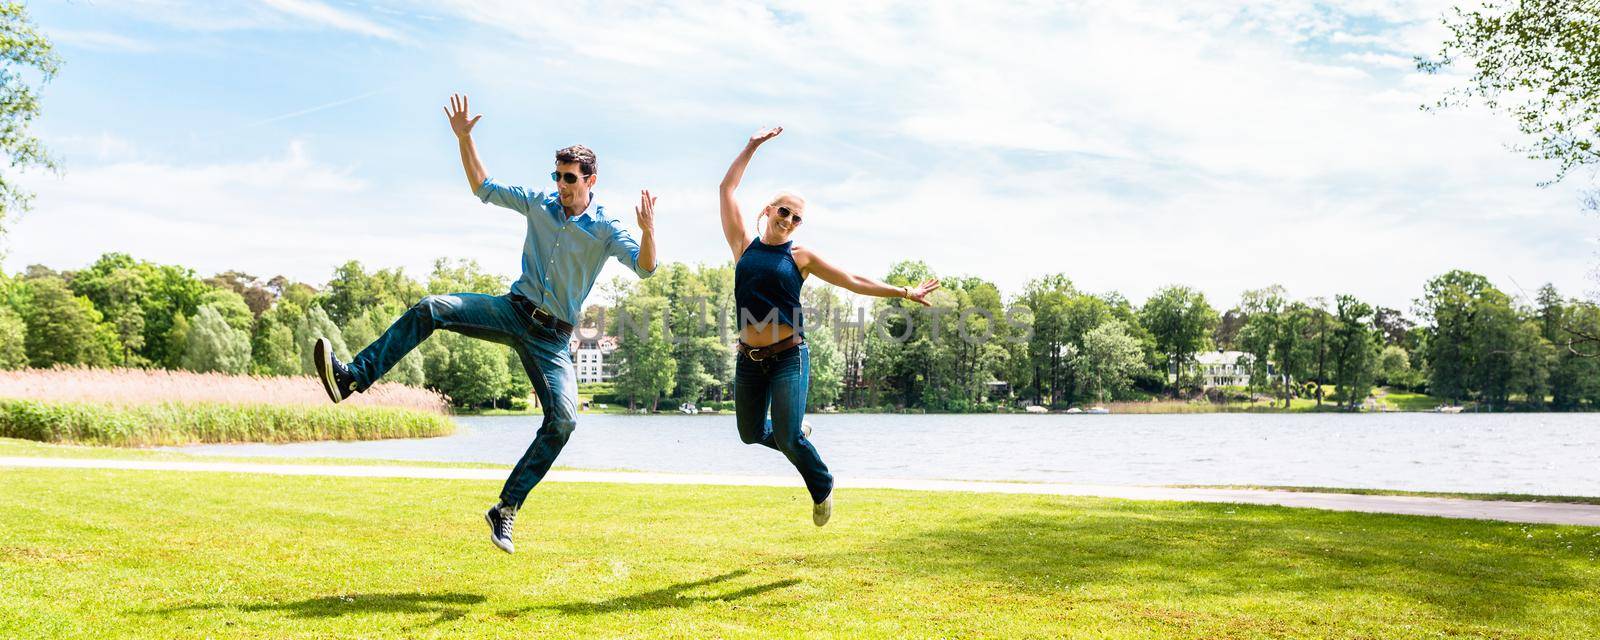 Young couple jumping in air by Kzenon